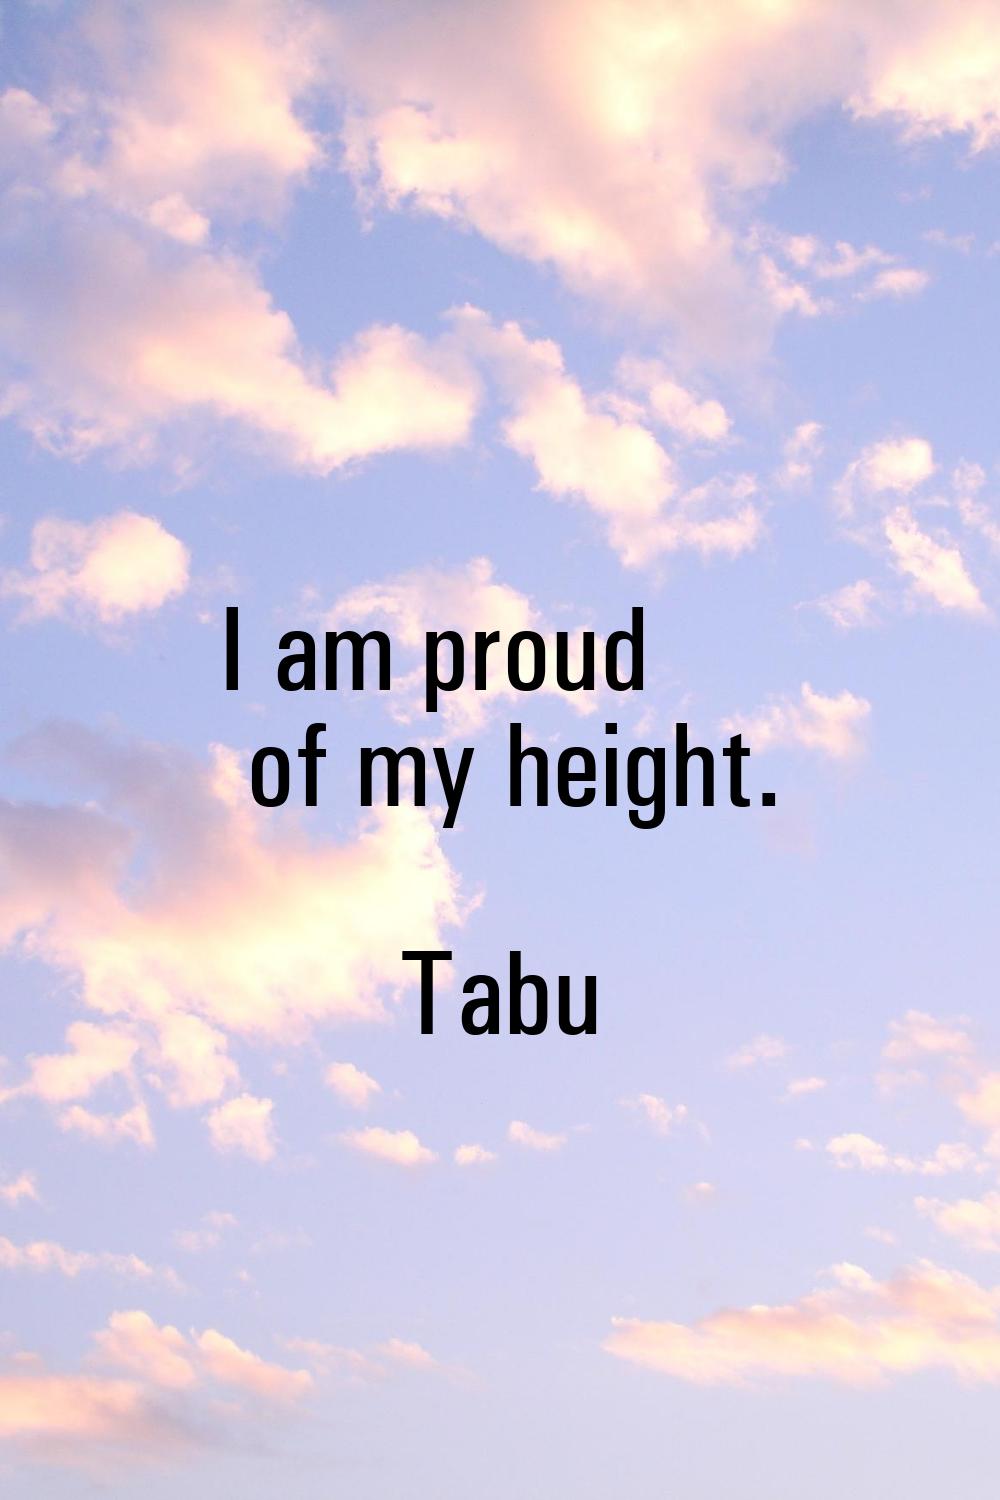 I am proud of my height.